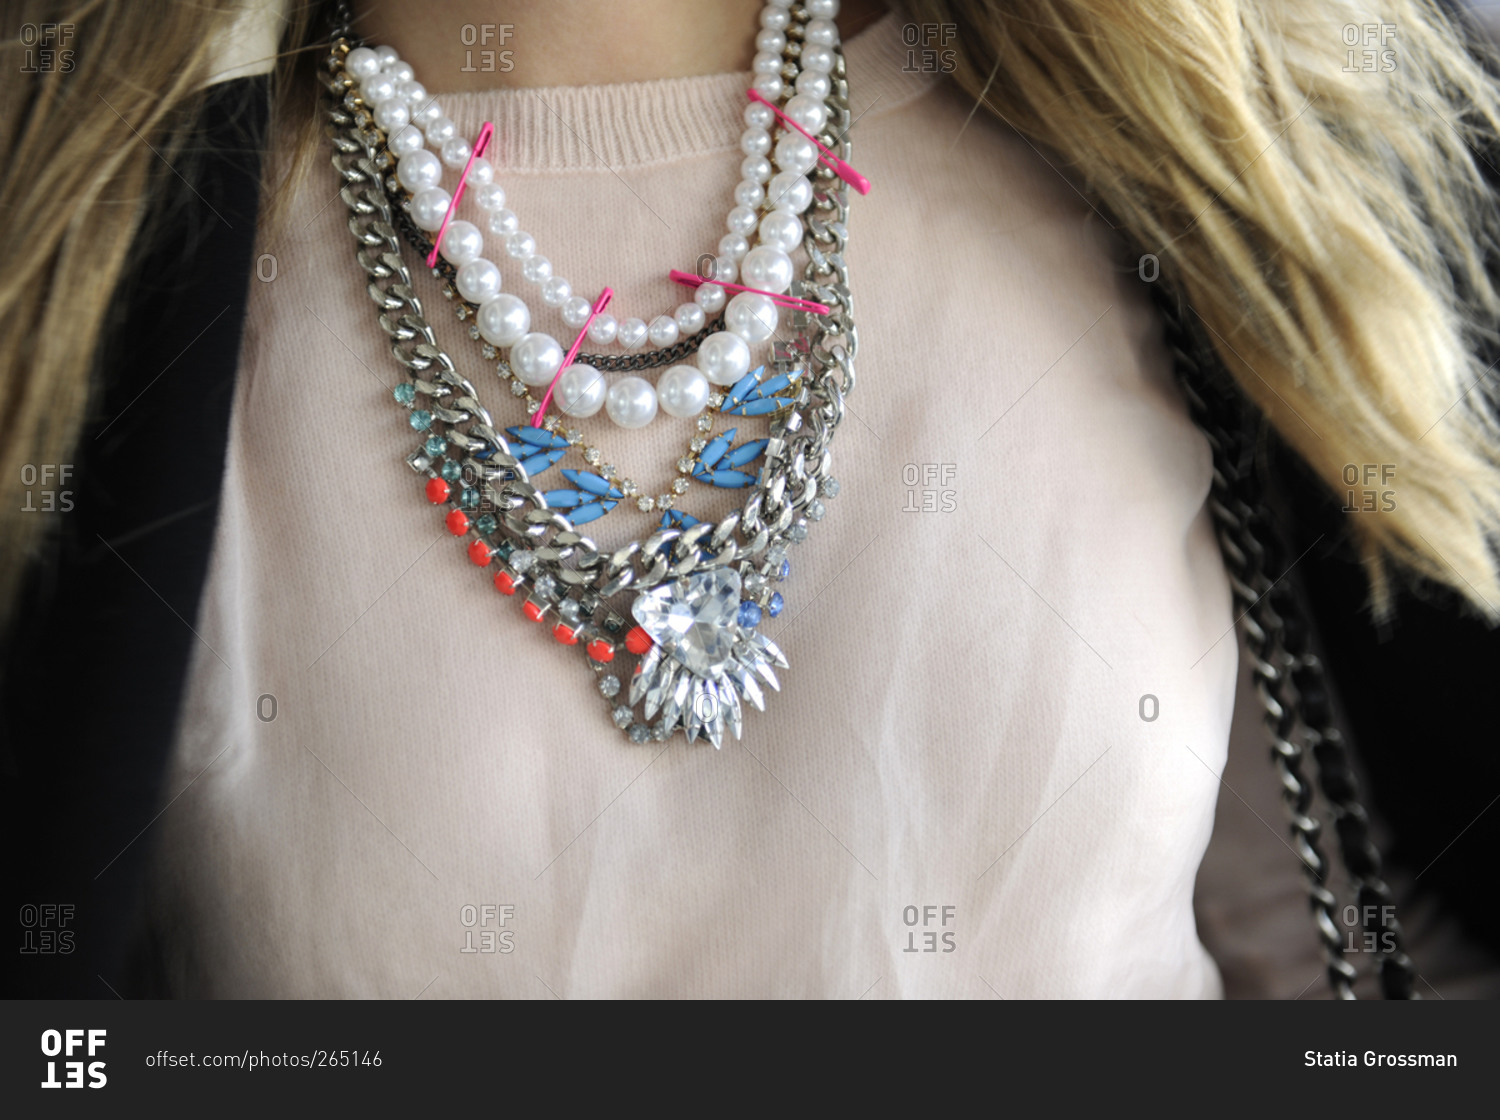 A woman wears a mix of necklaces